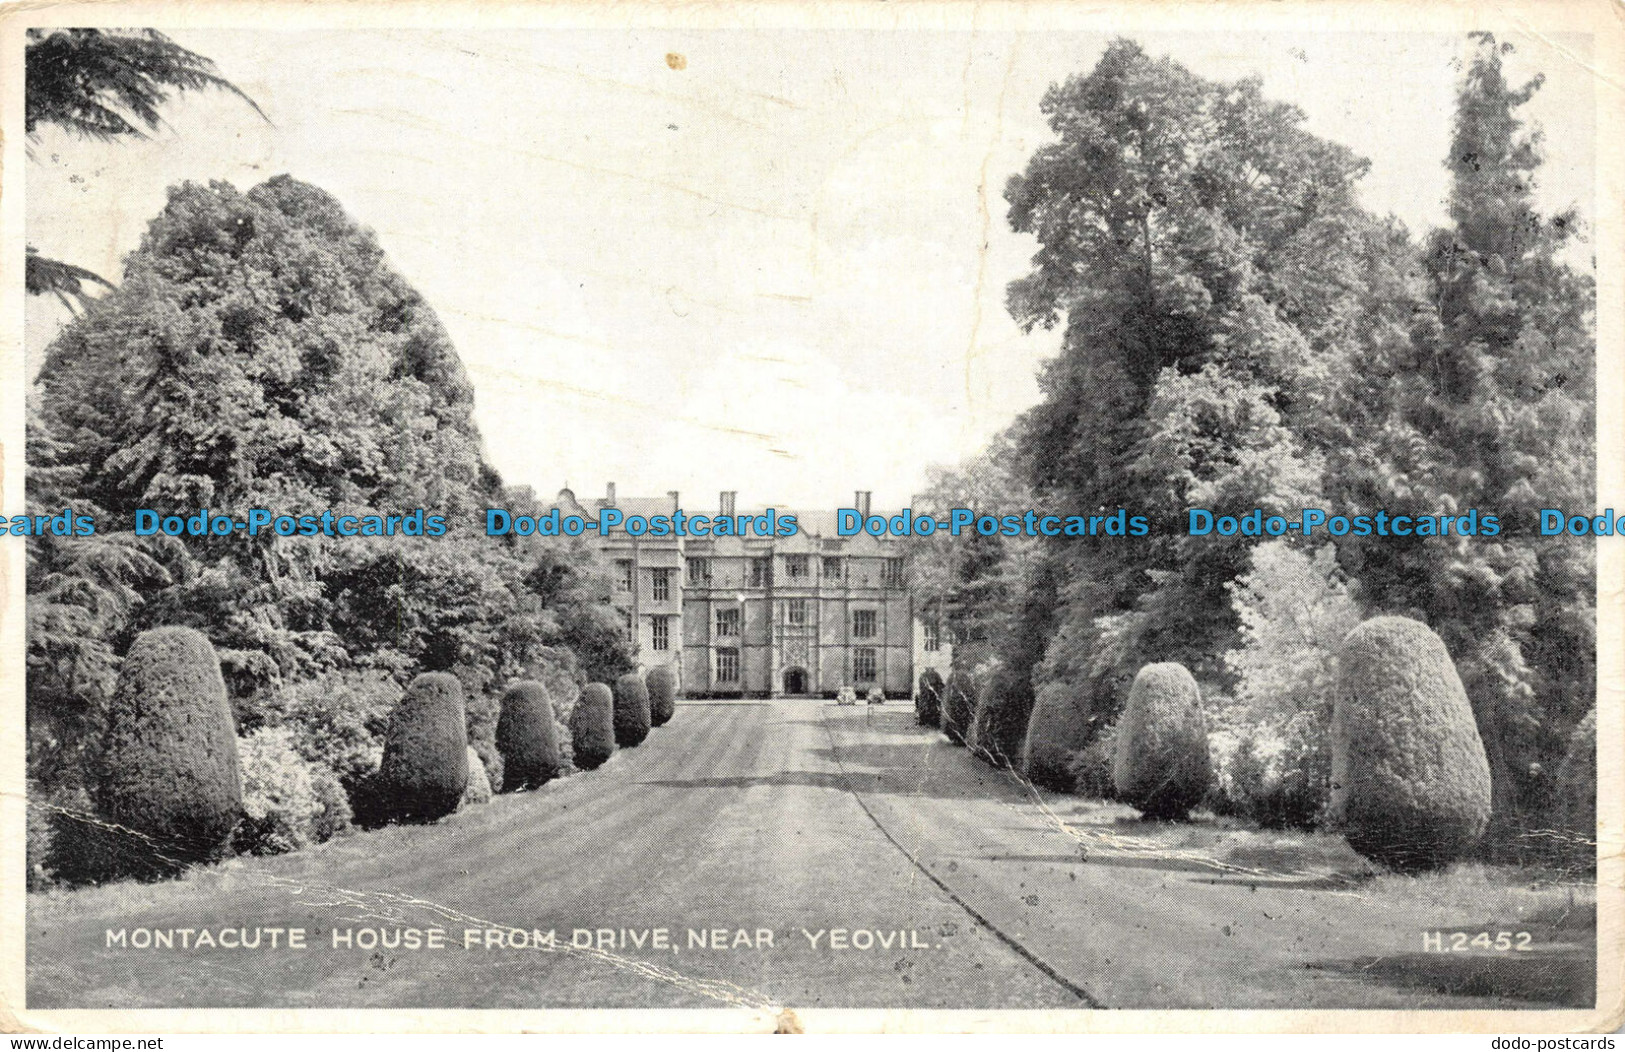 R075279 Montacute House From Drive. Near Yeovil. Silveresque. Valentine. 1951 - World